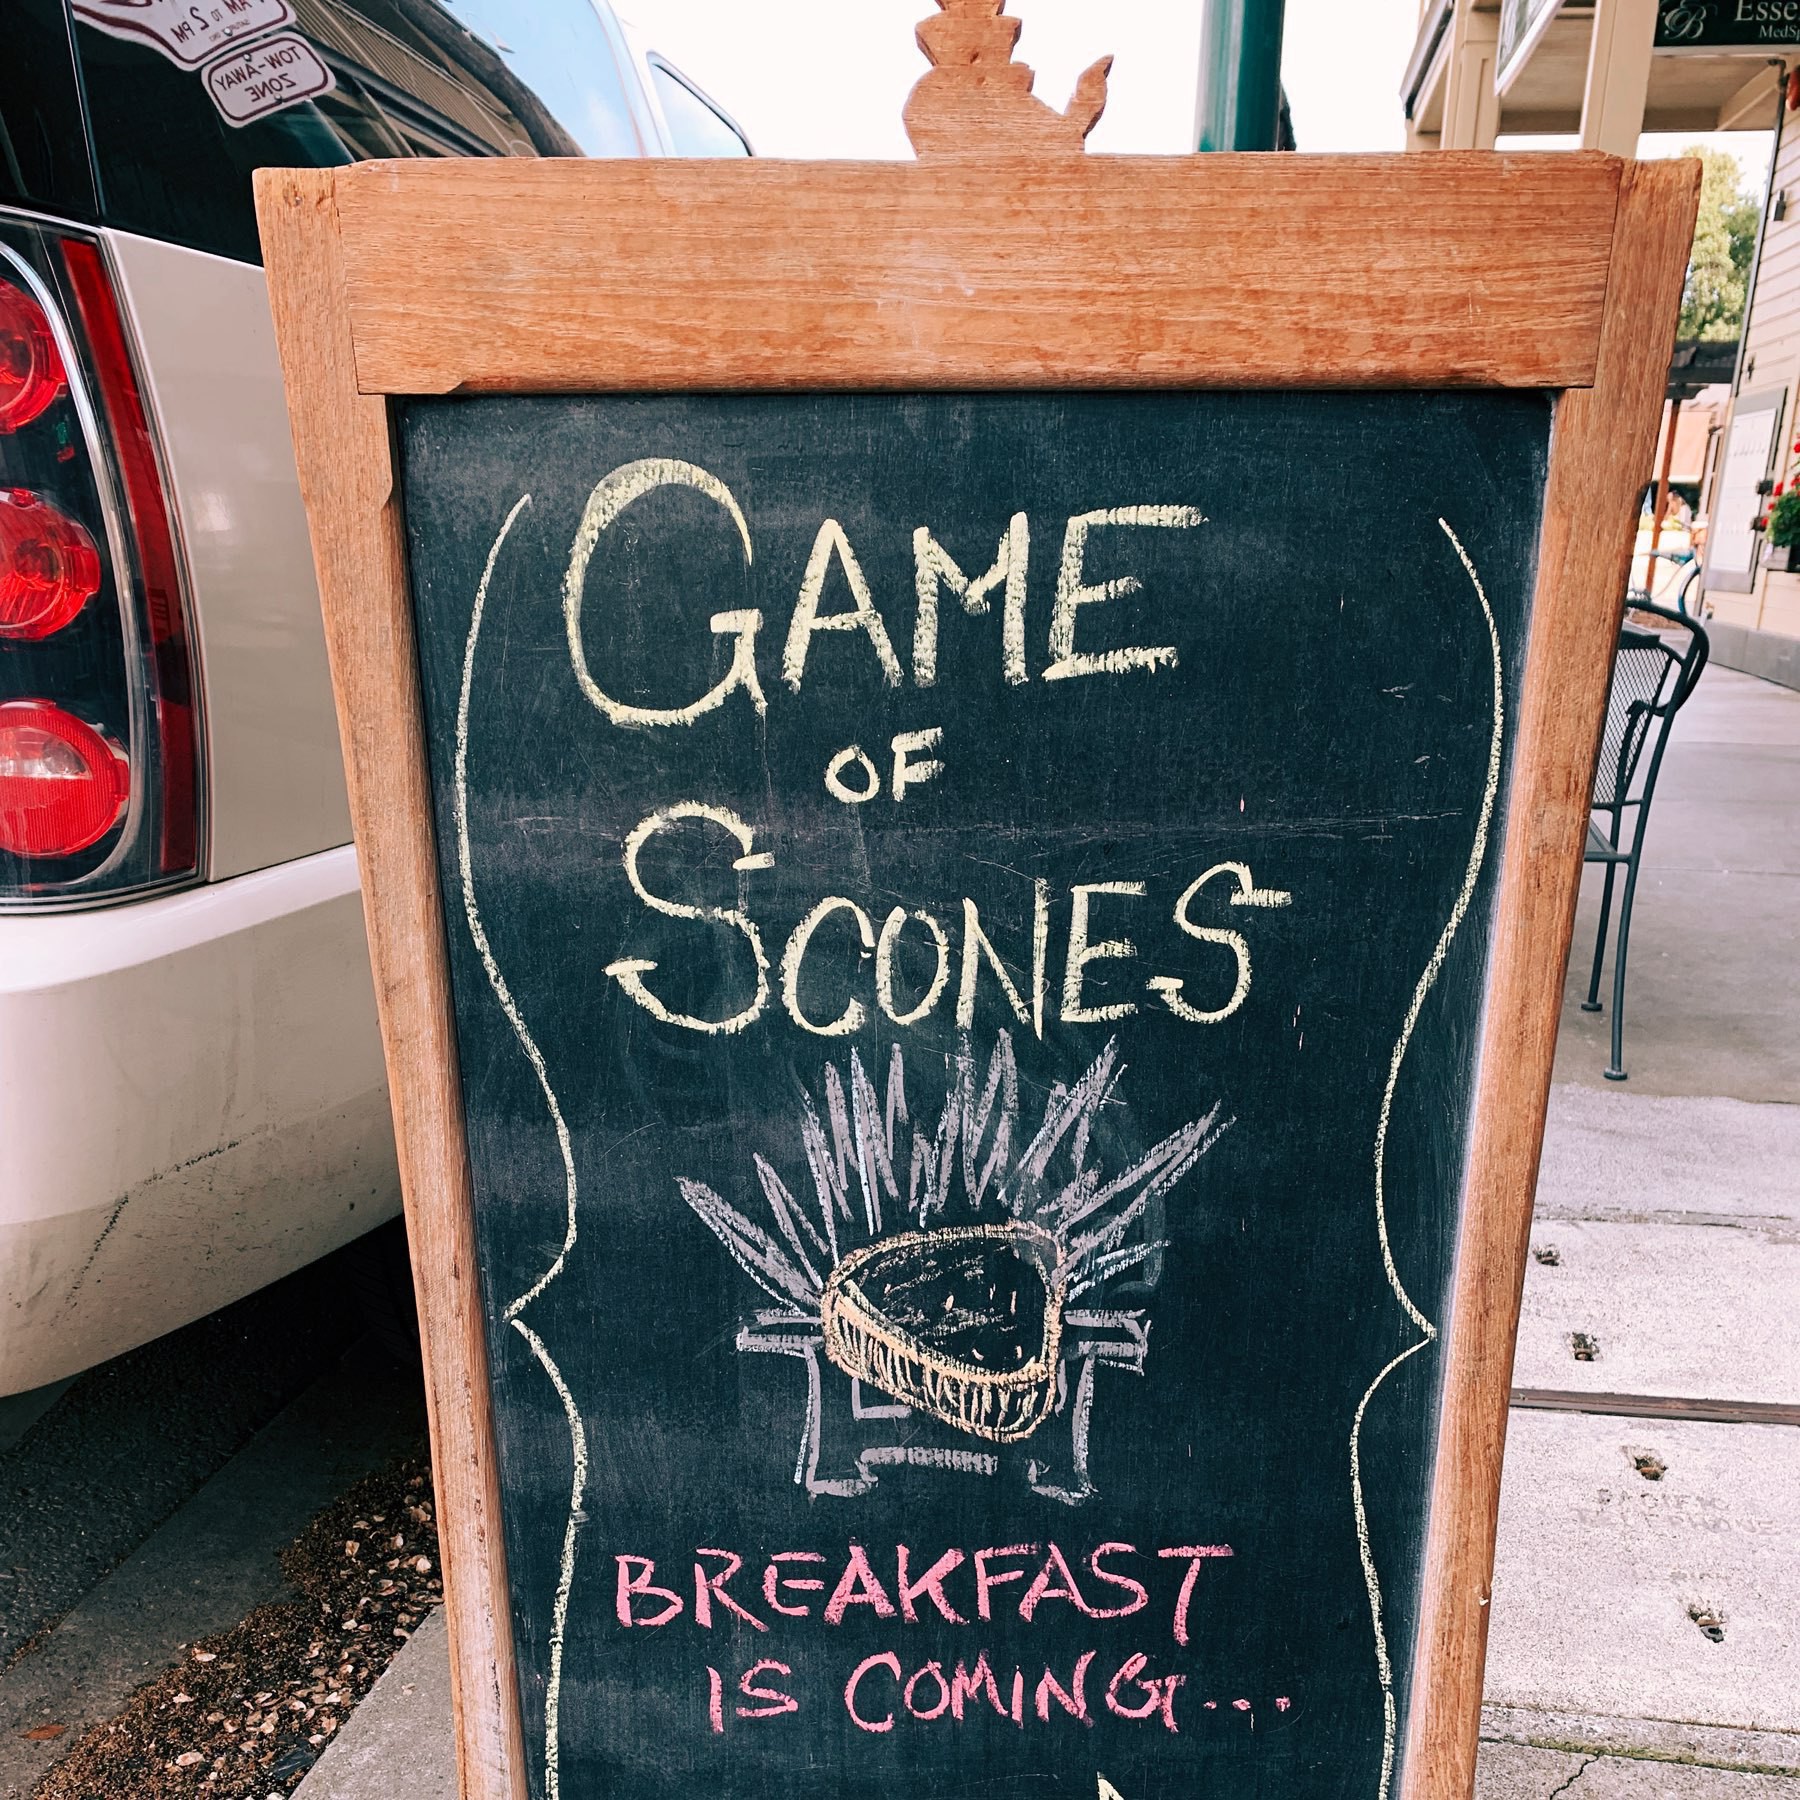 chalkboard sign reading "Game of Scones: breakfast is coming"